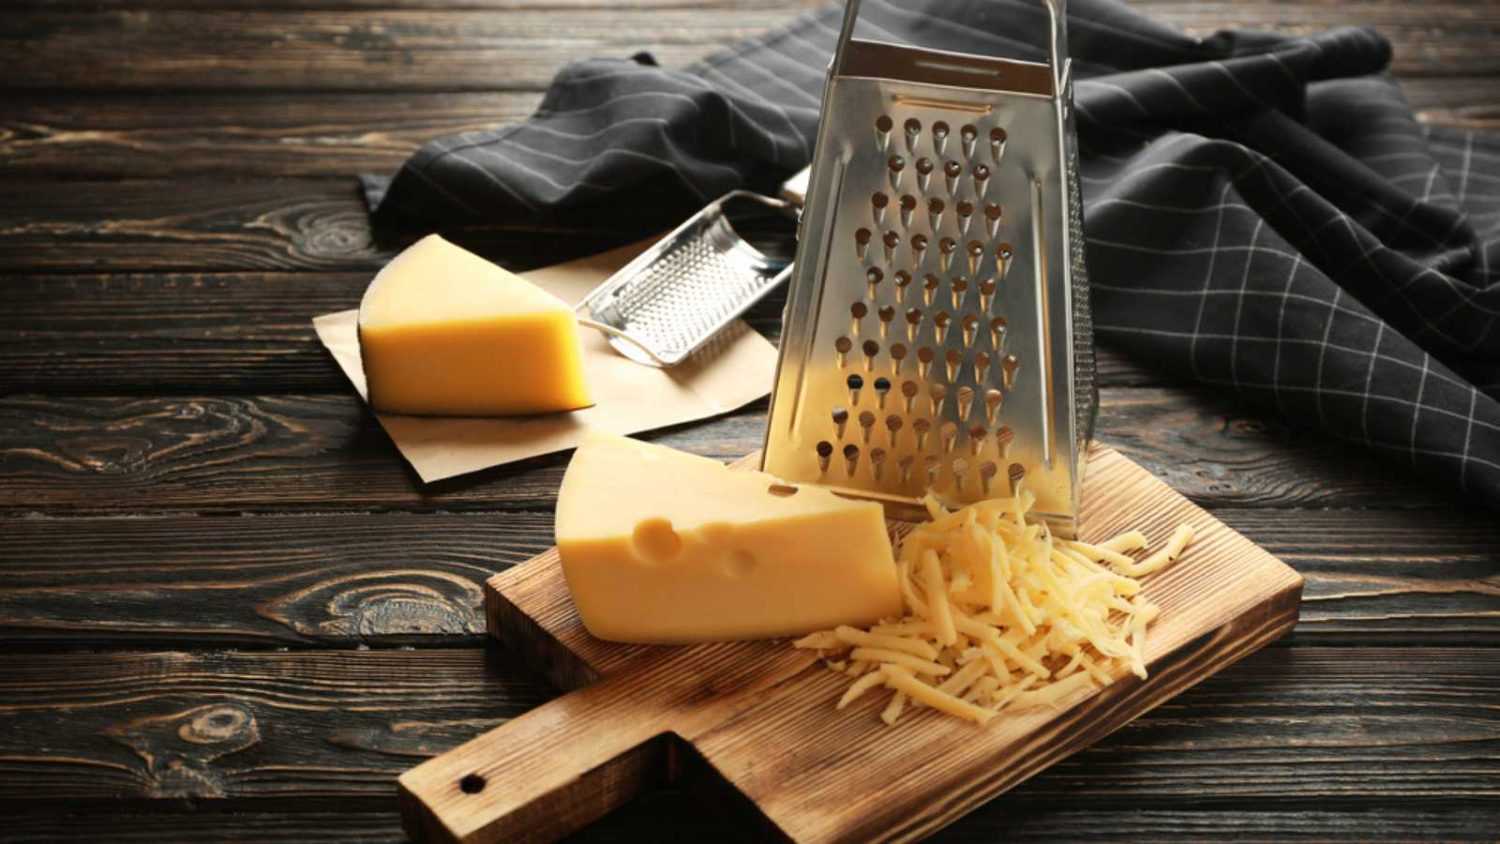 Grater and cheese on wooden board